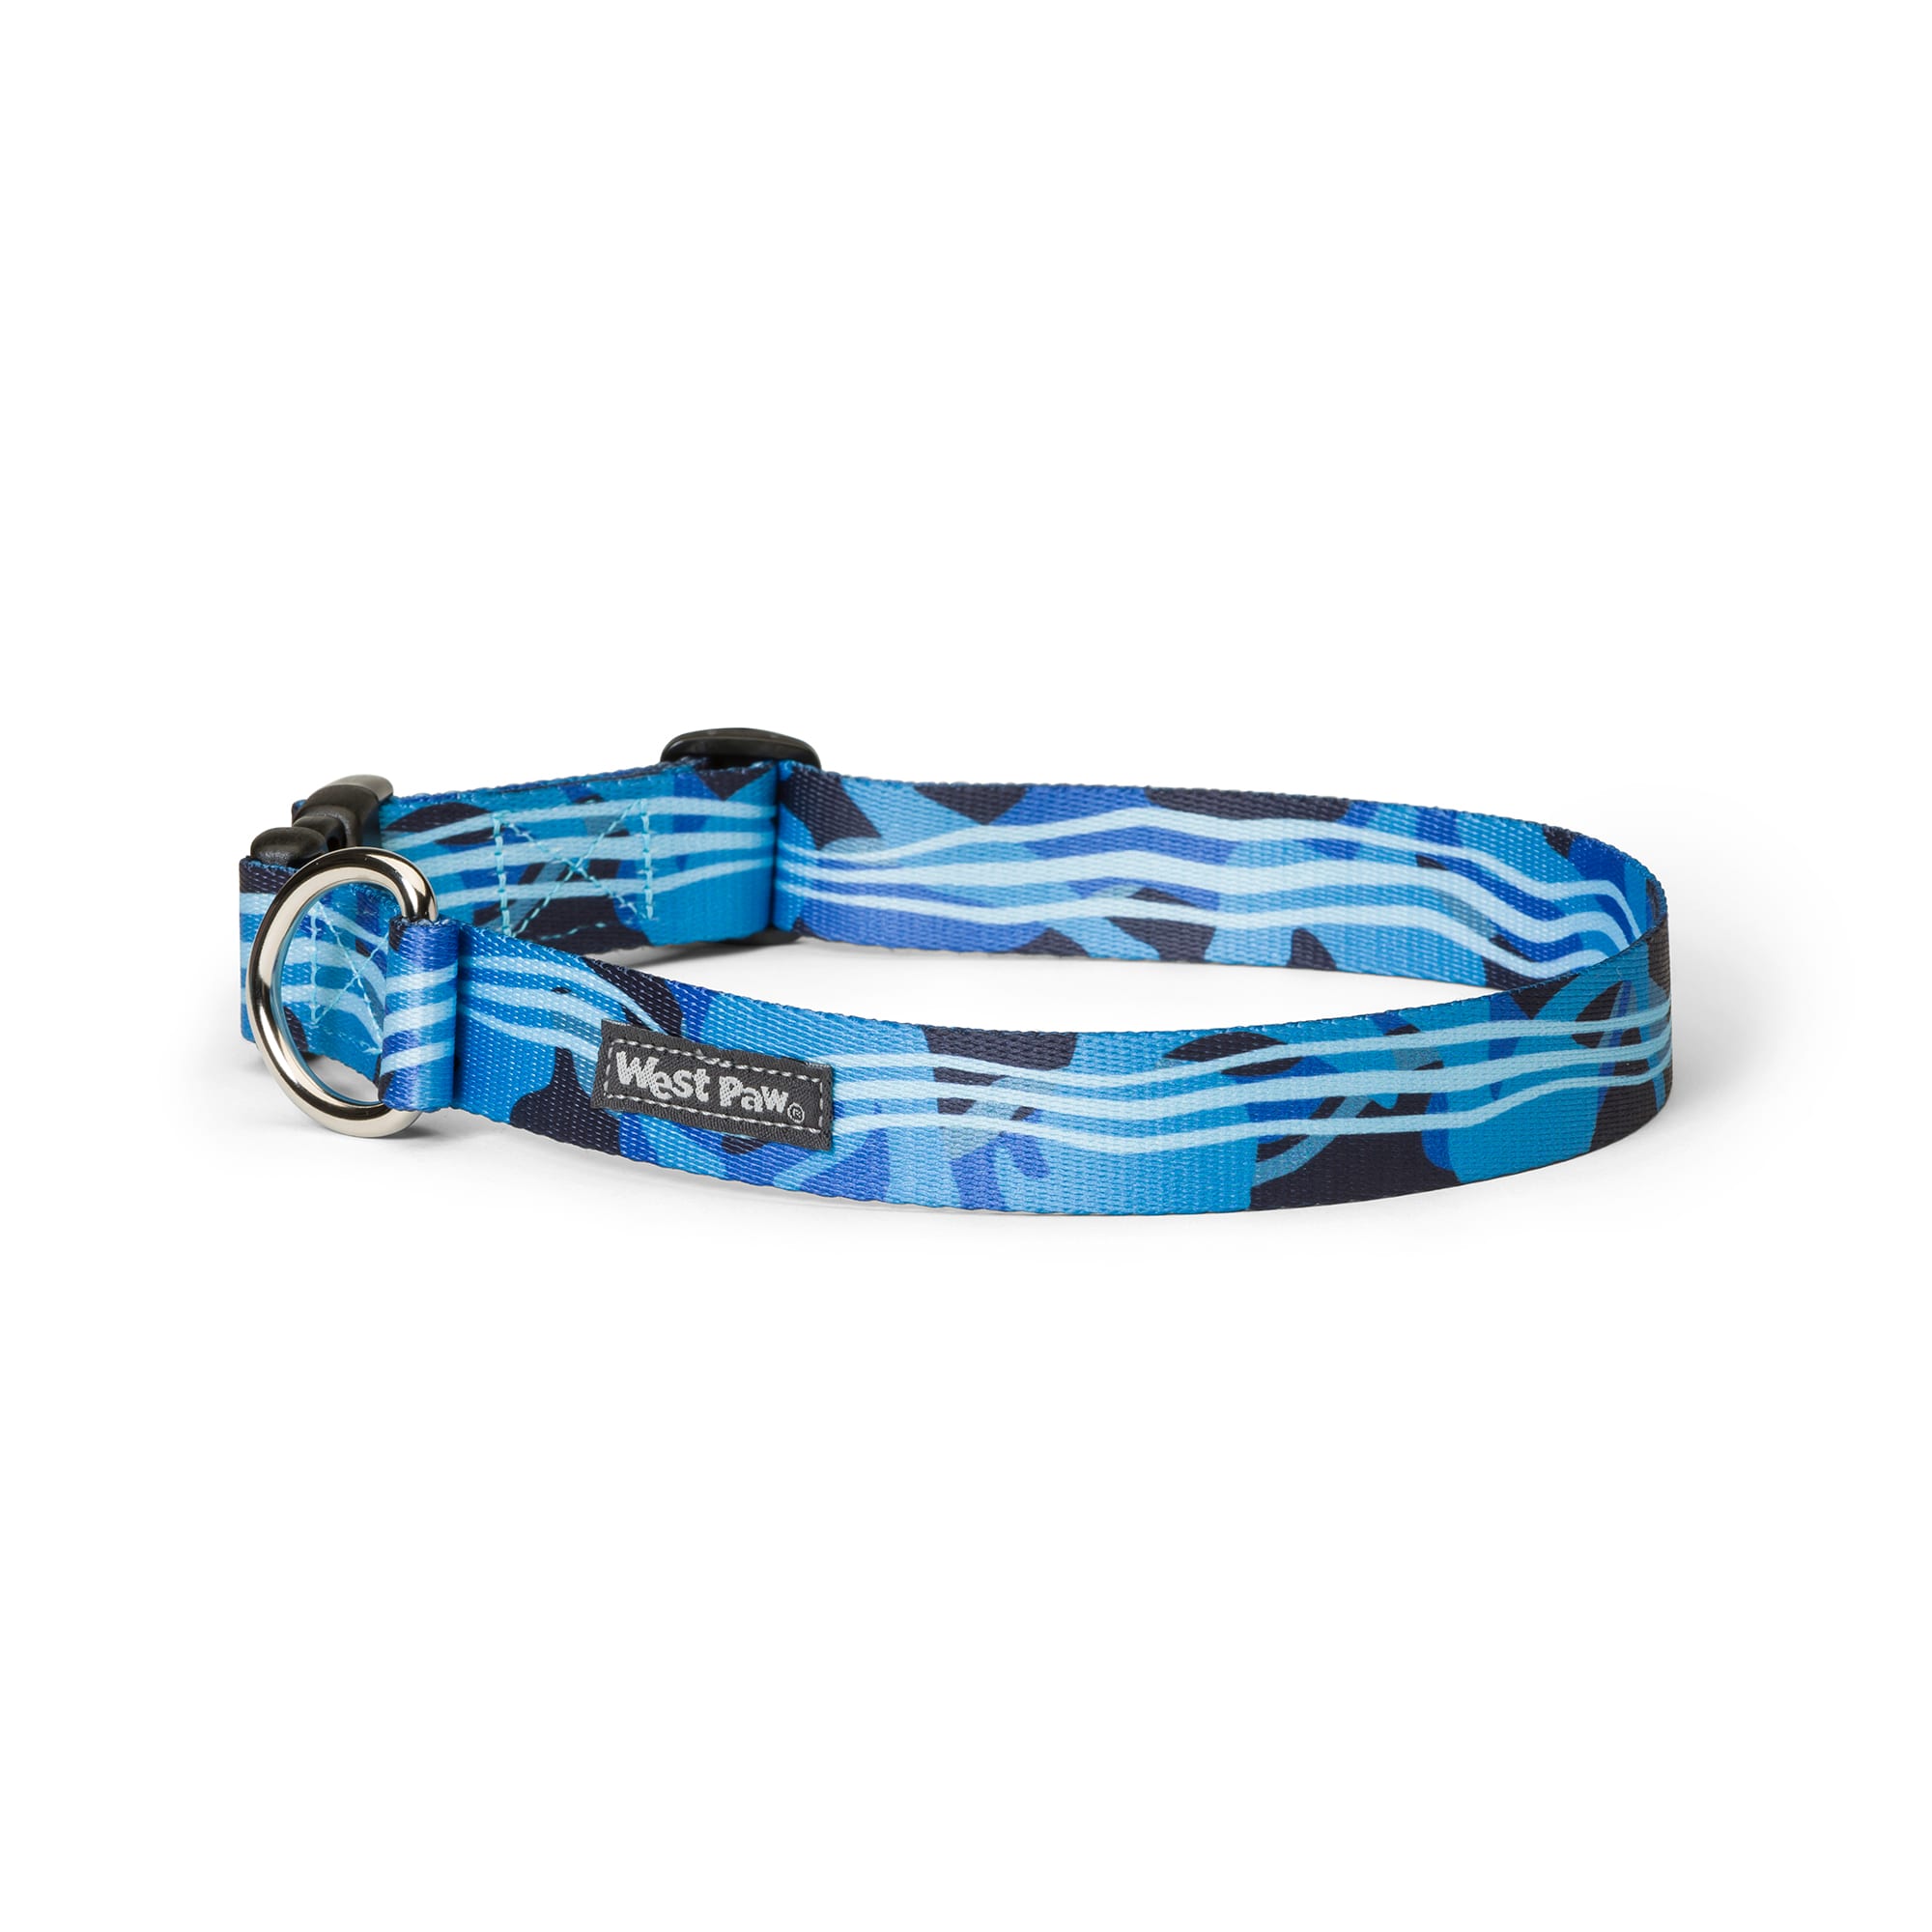 West Paw Outings Collar in Blue Groove for Dogs, Medium | Petco